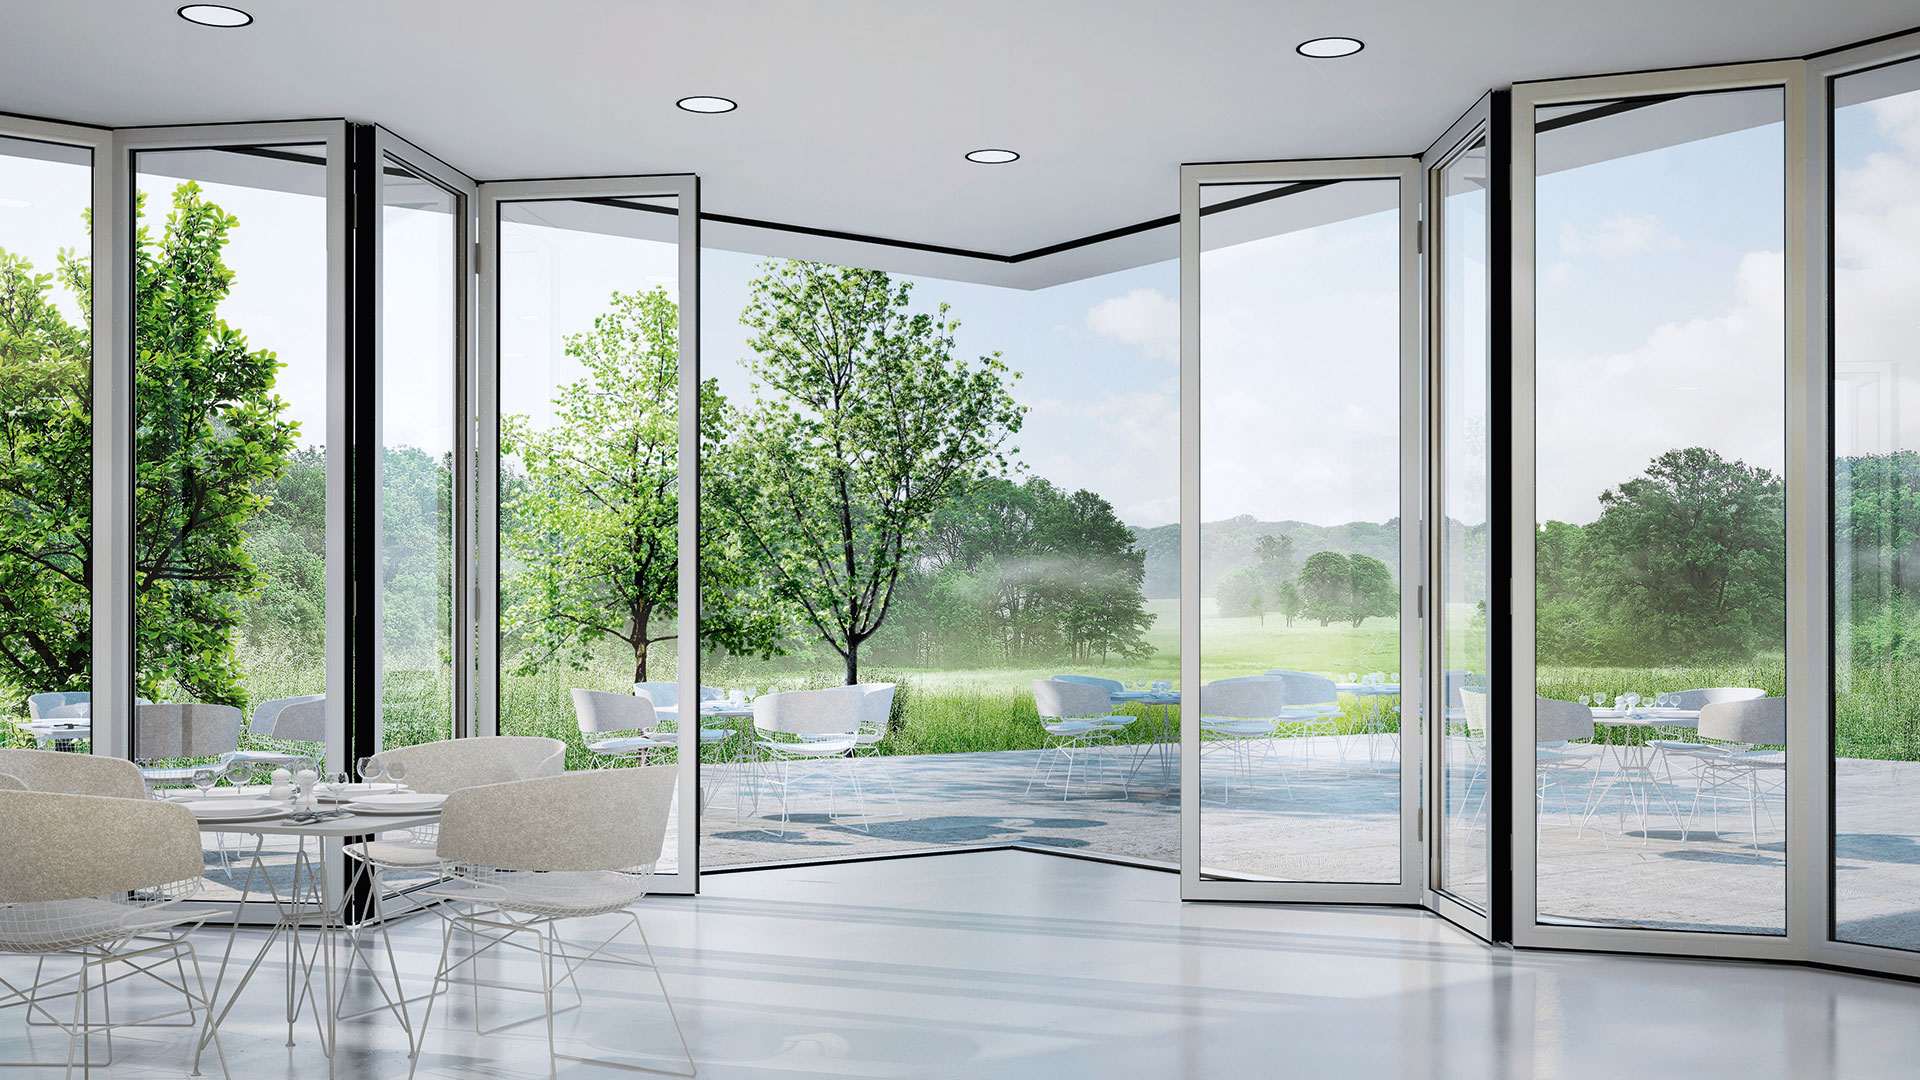 What Makes the Sliding Doors Highly Popular?